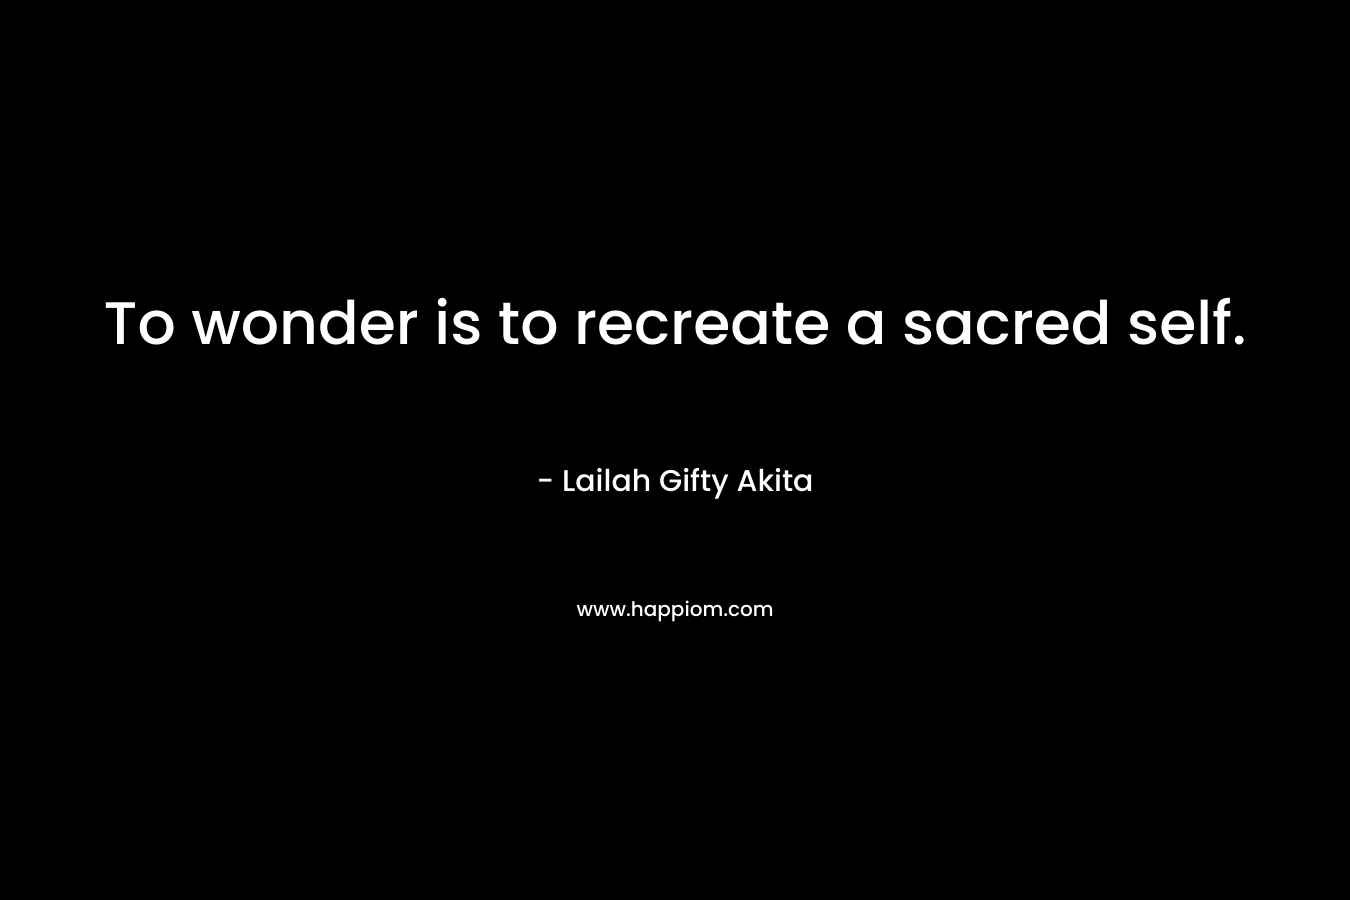 To wonder is to recreate a sacred self.